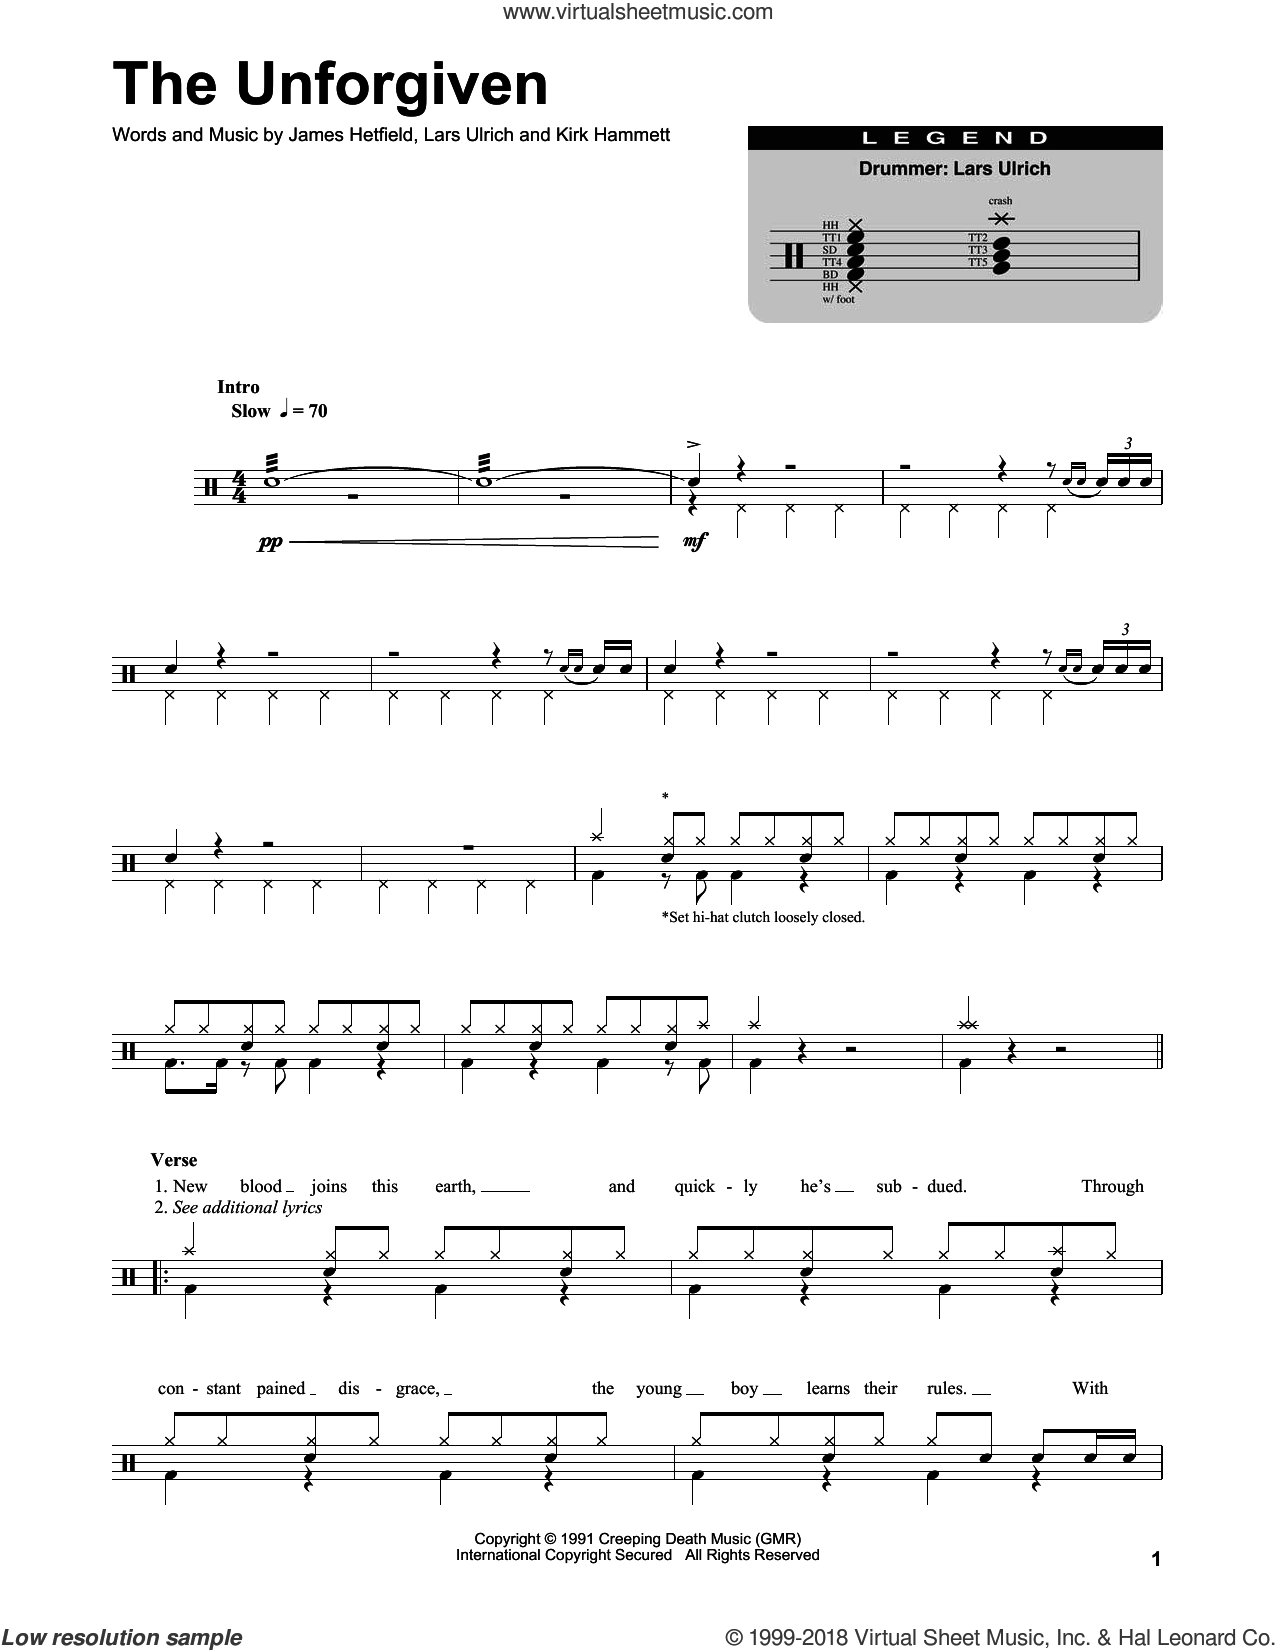 The Unforgiven sheet music for drums (PDF)